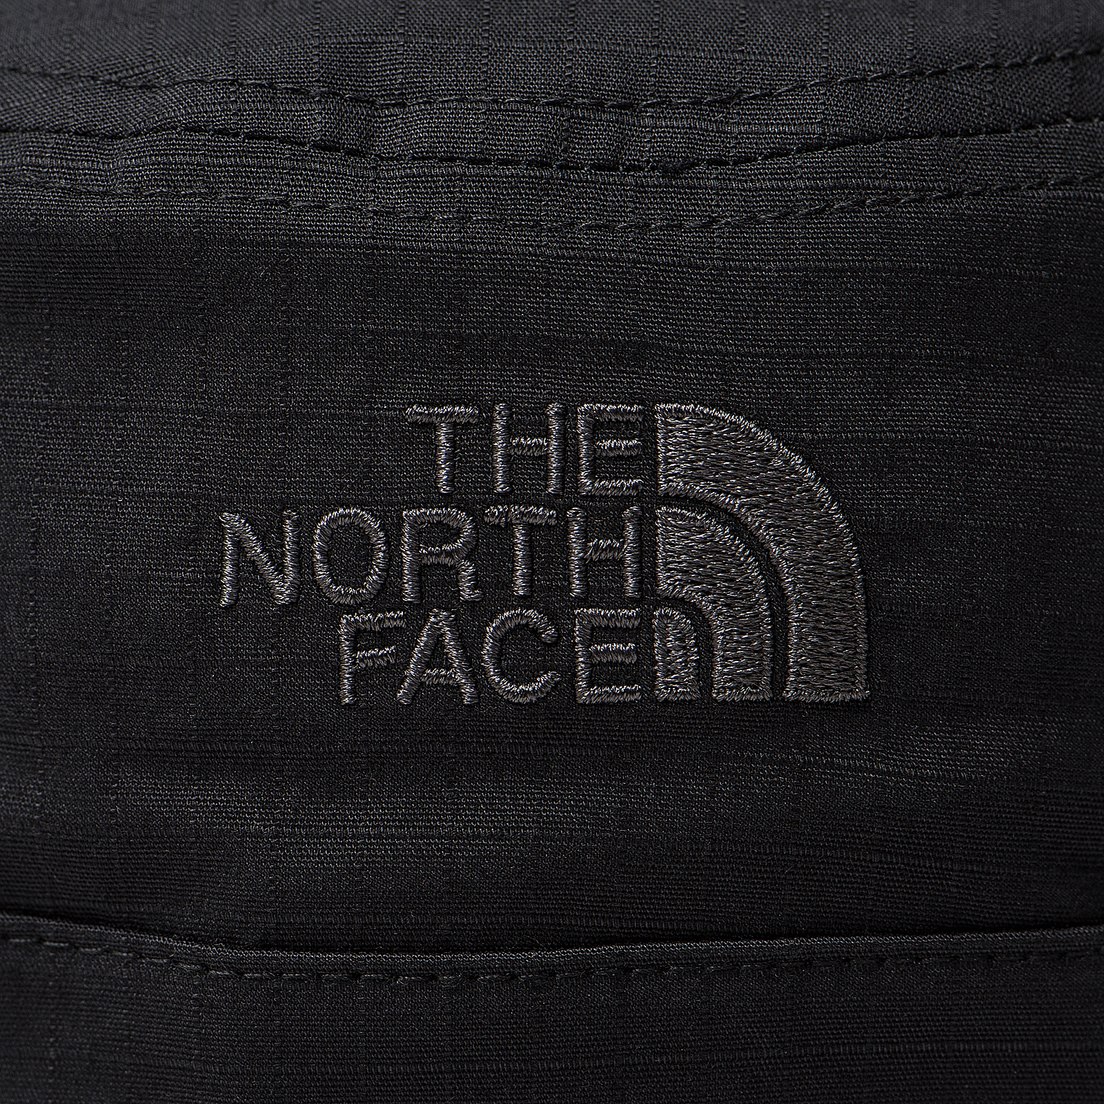 The North Face Панама Cotton Bucket